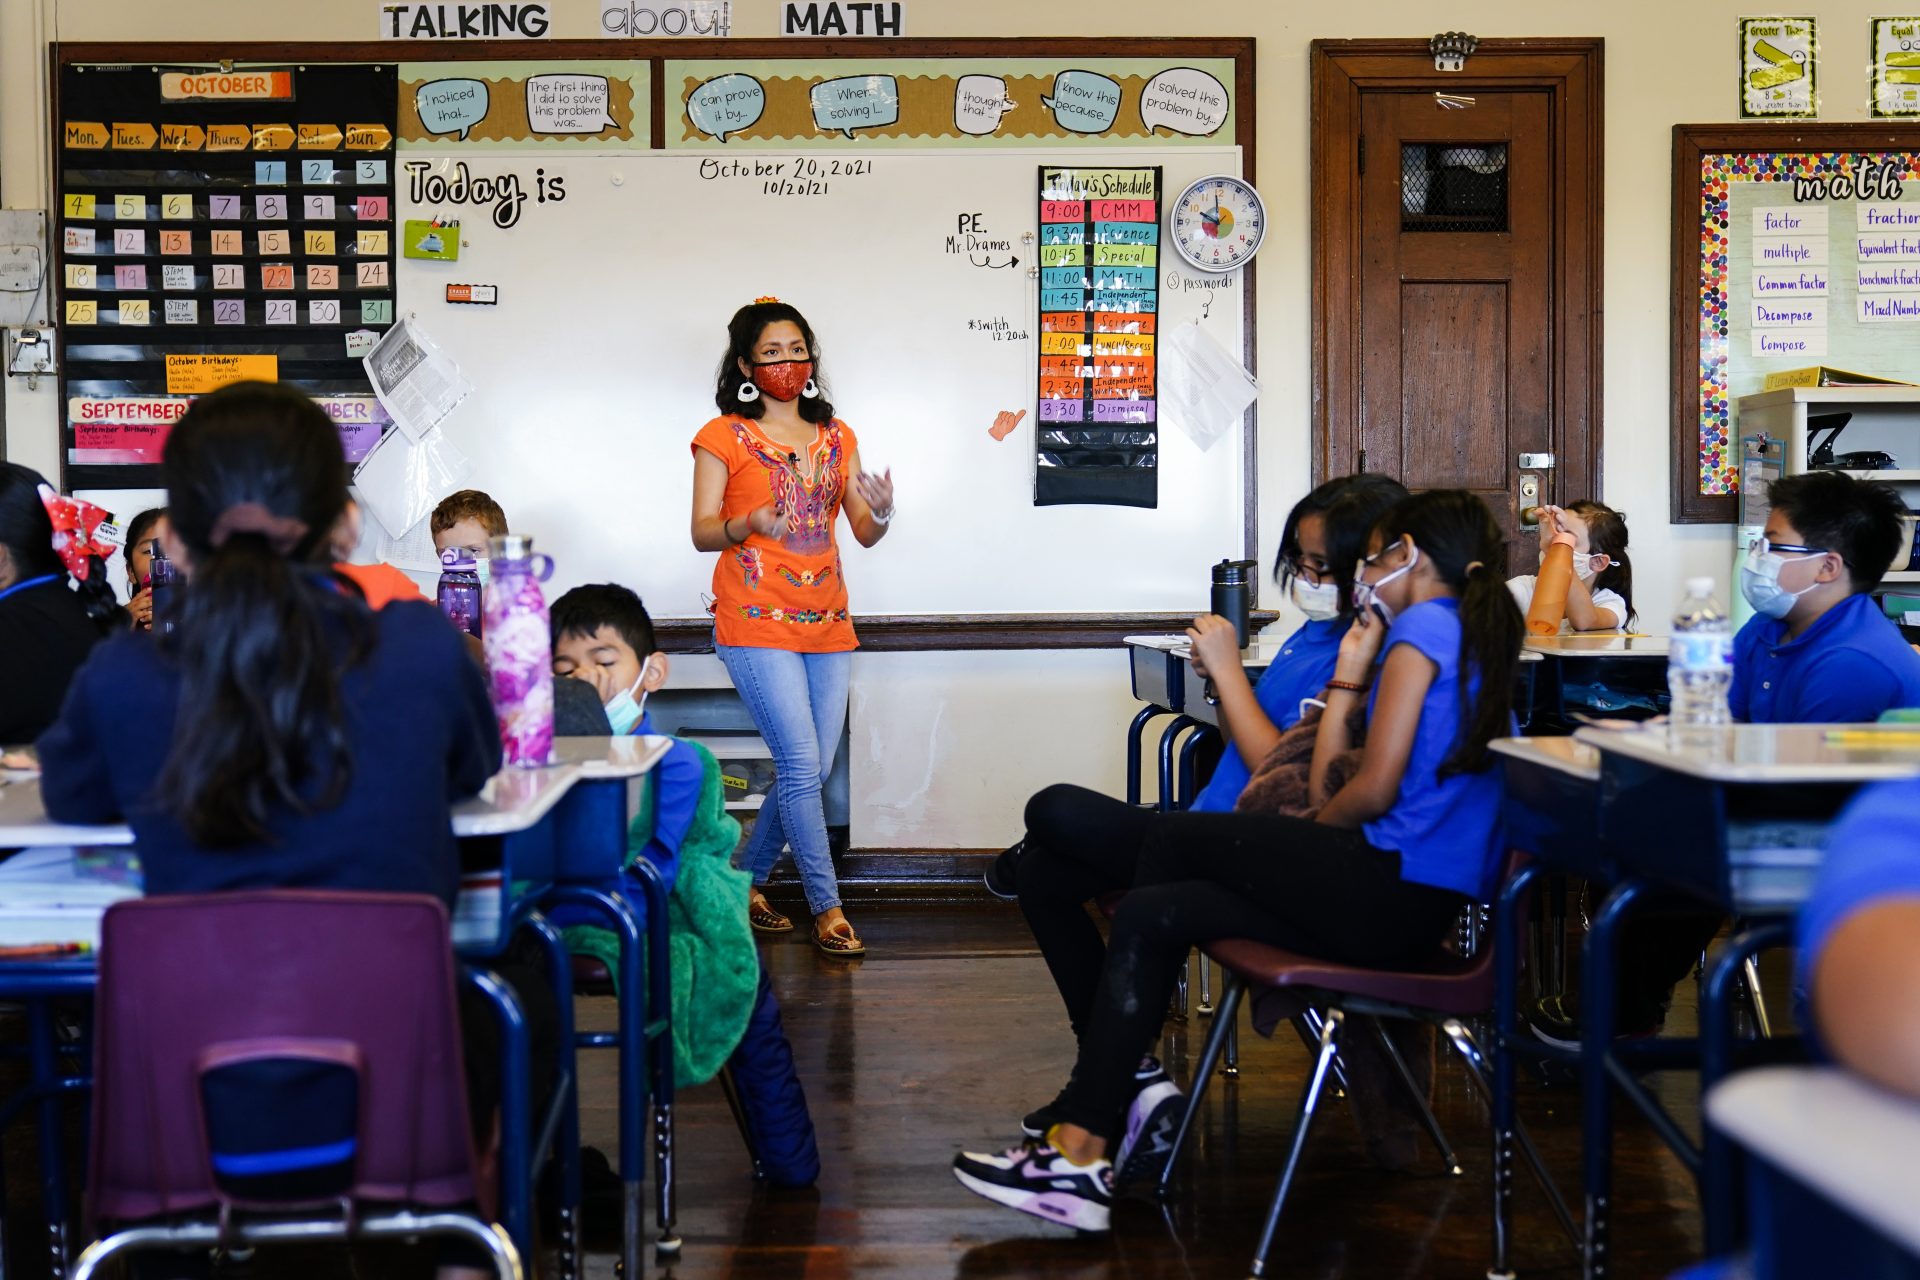 Student teacher Olivia Vazquez leads students through their morning meeting at the Eliza B. Kirkbride School in Philadelphia, Wednesday, Oct. 20, 2021.